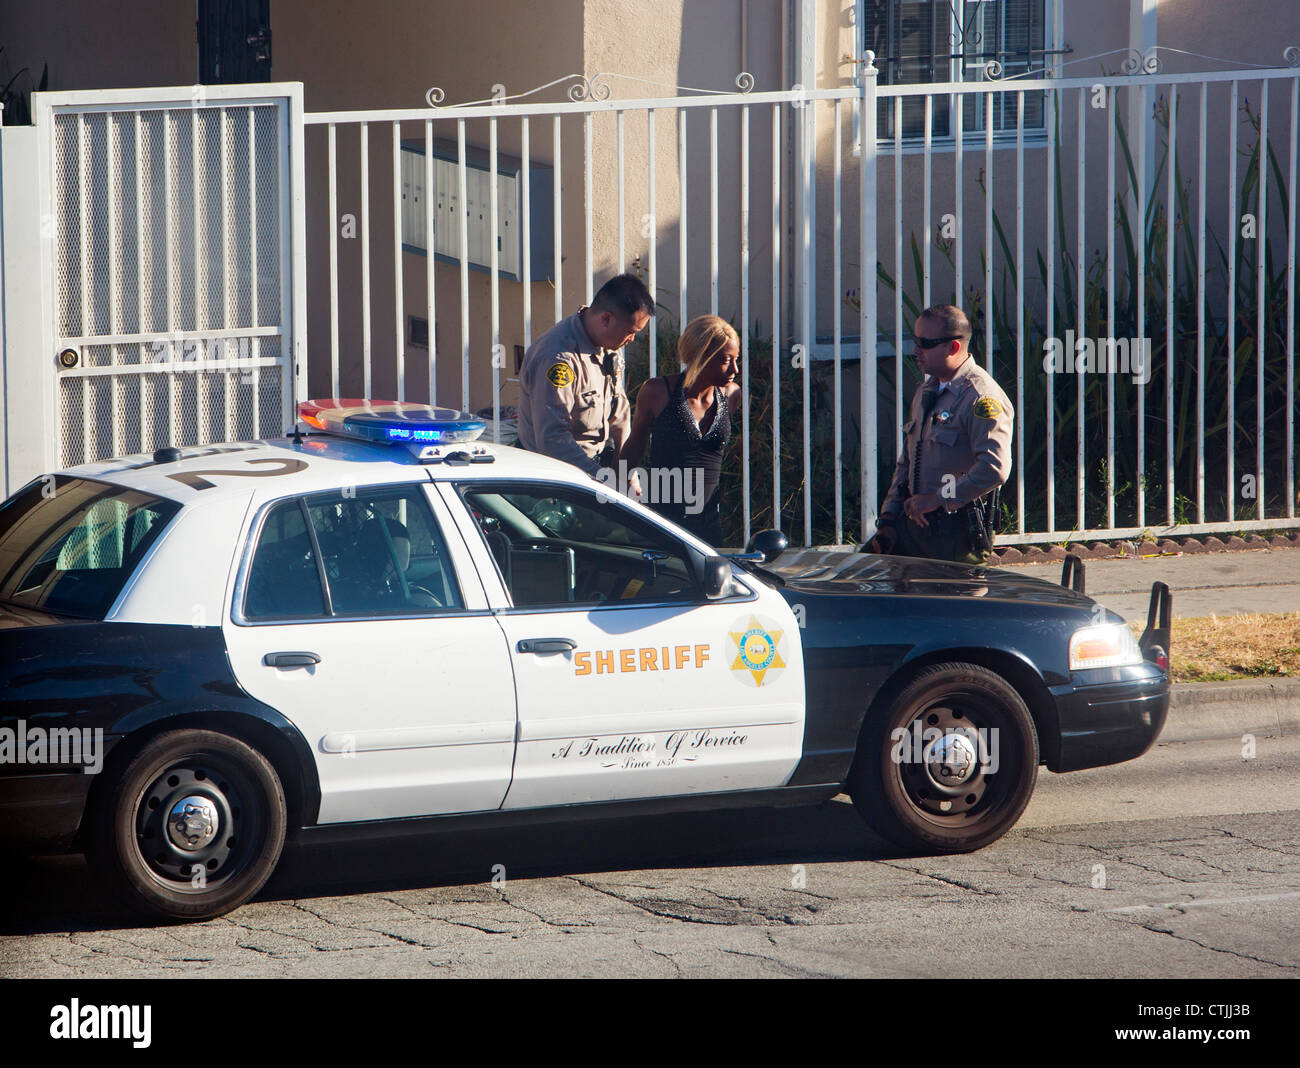 Inglewood, California - Los Angeles County sheriff's deputies arrest a woman on the street. Stock Photo